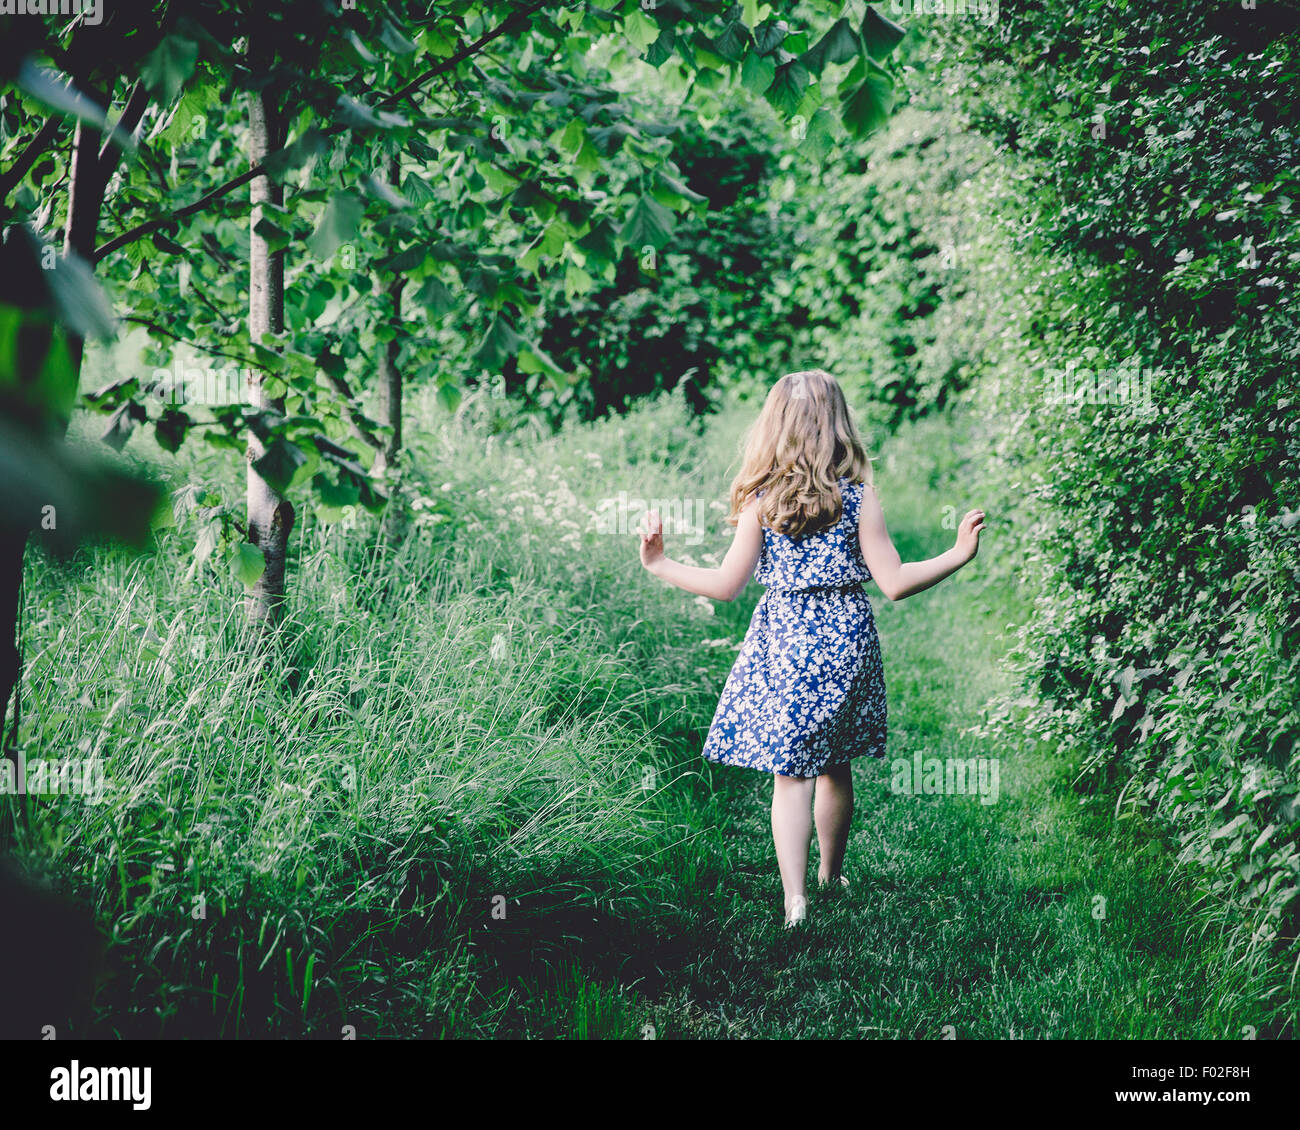 Rear view of a girl walking through forest Stock Photo